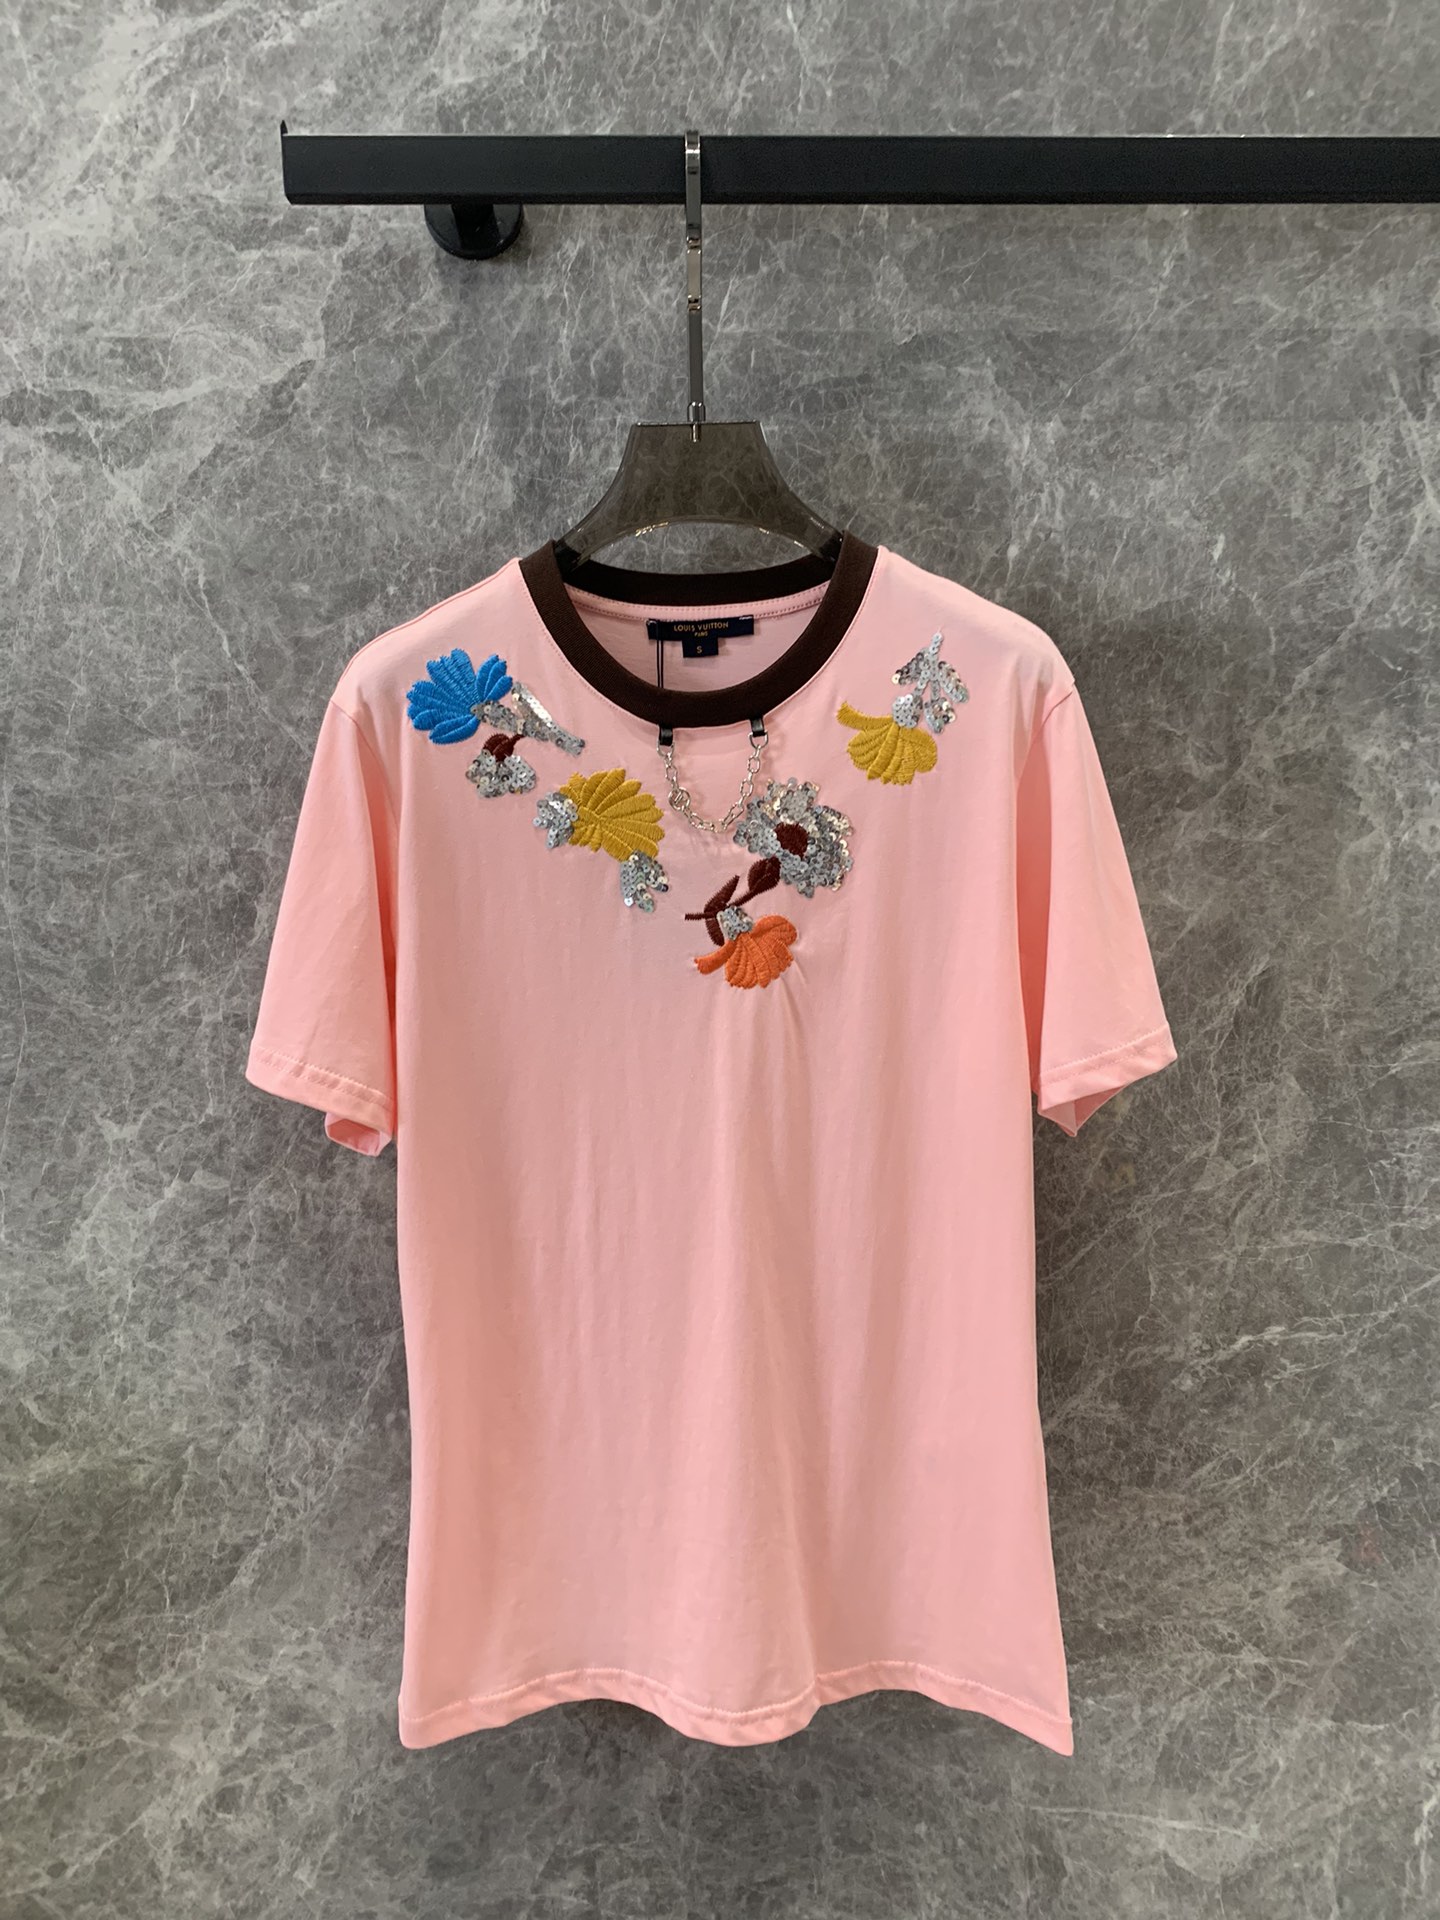 Louis Vuitton Clothing T-Shirt Embroidery Summer Collection LV Circle Short Sleeve